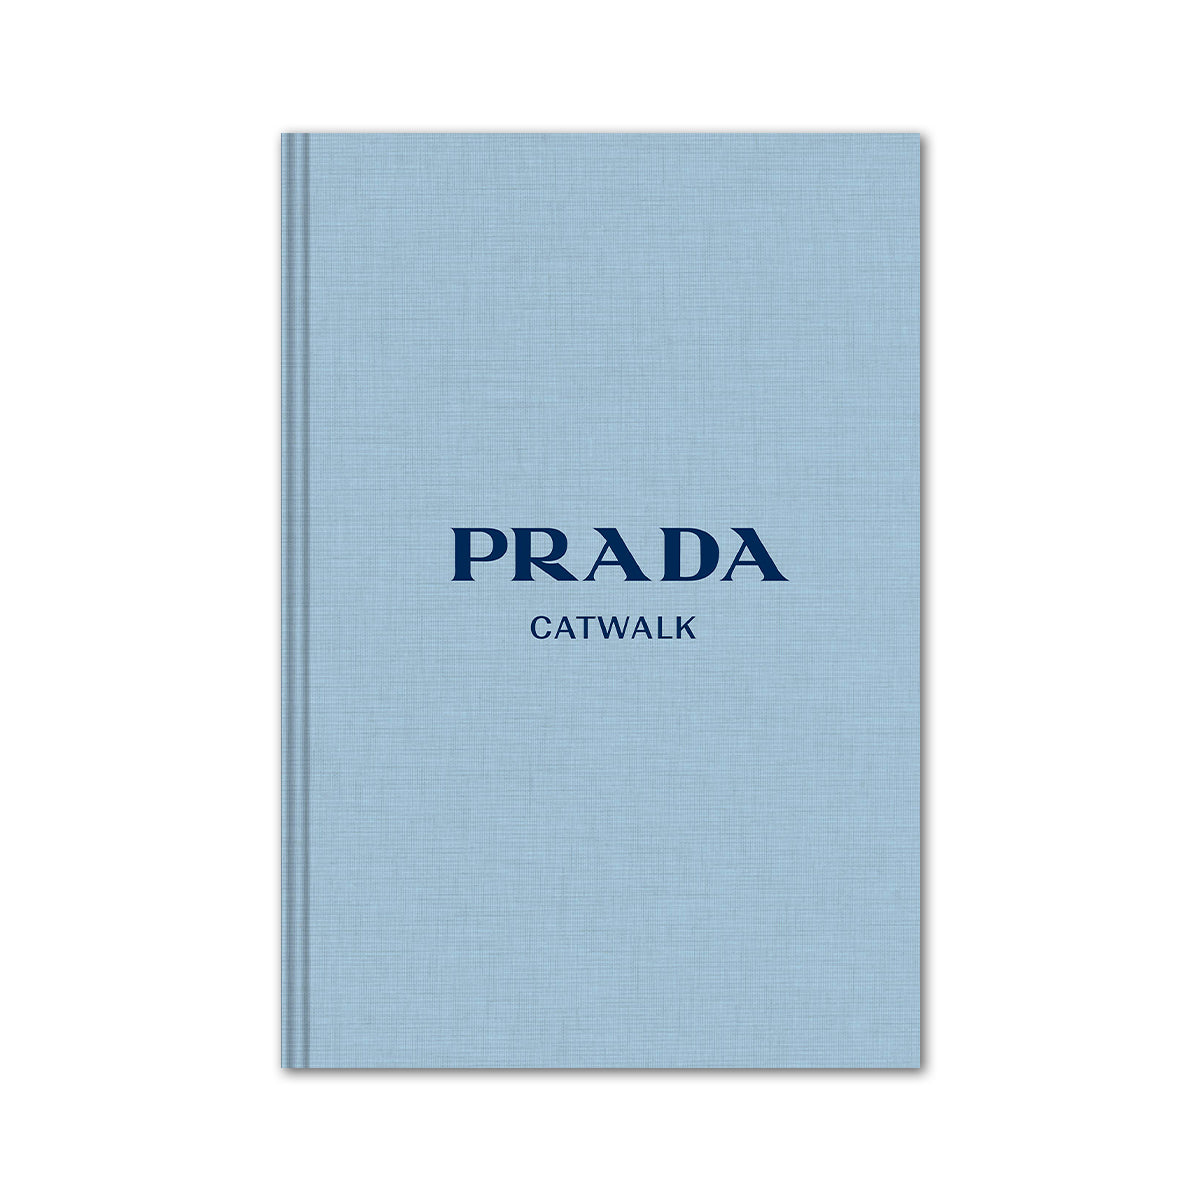 Prada: The Complete Collections